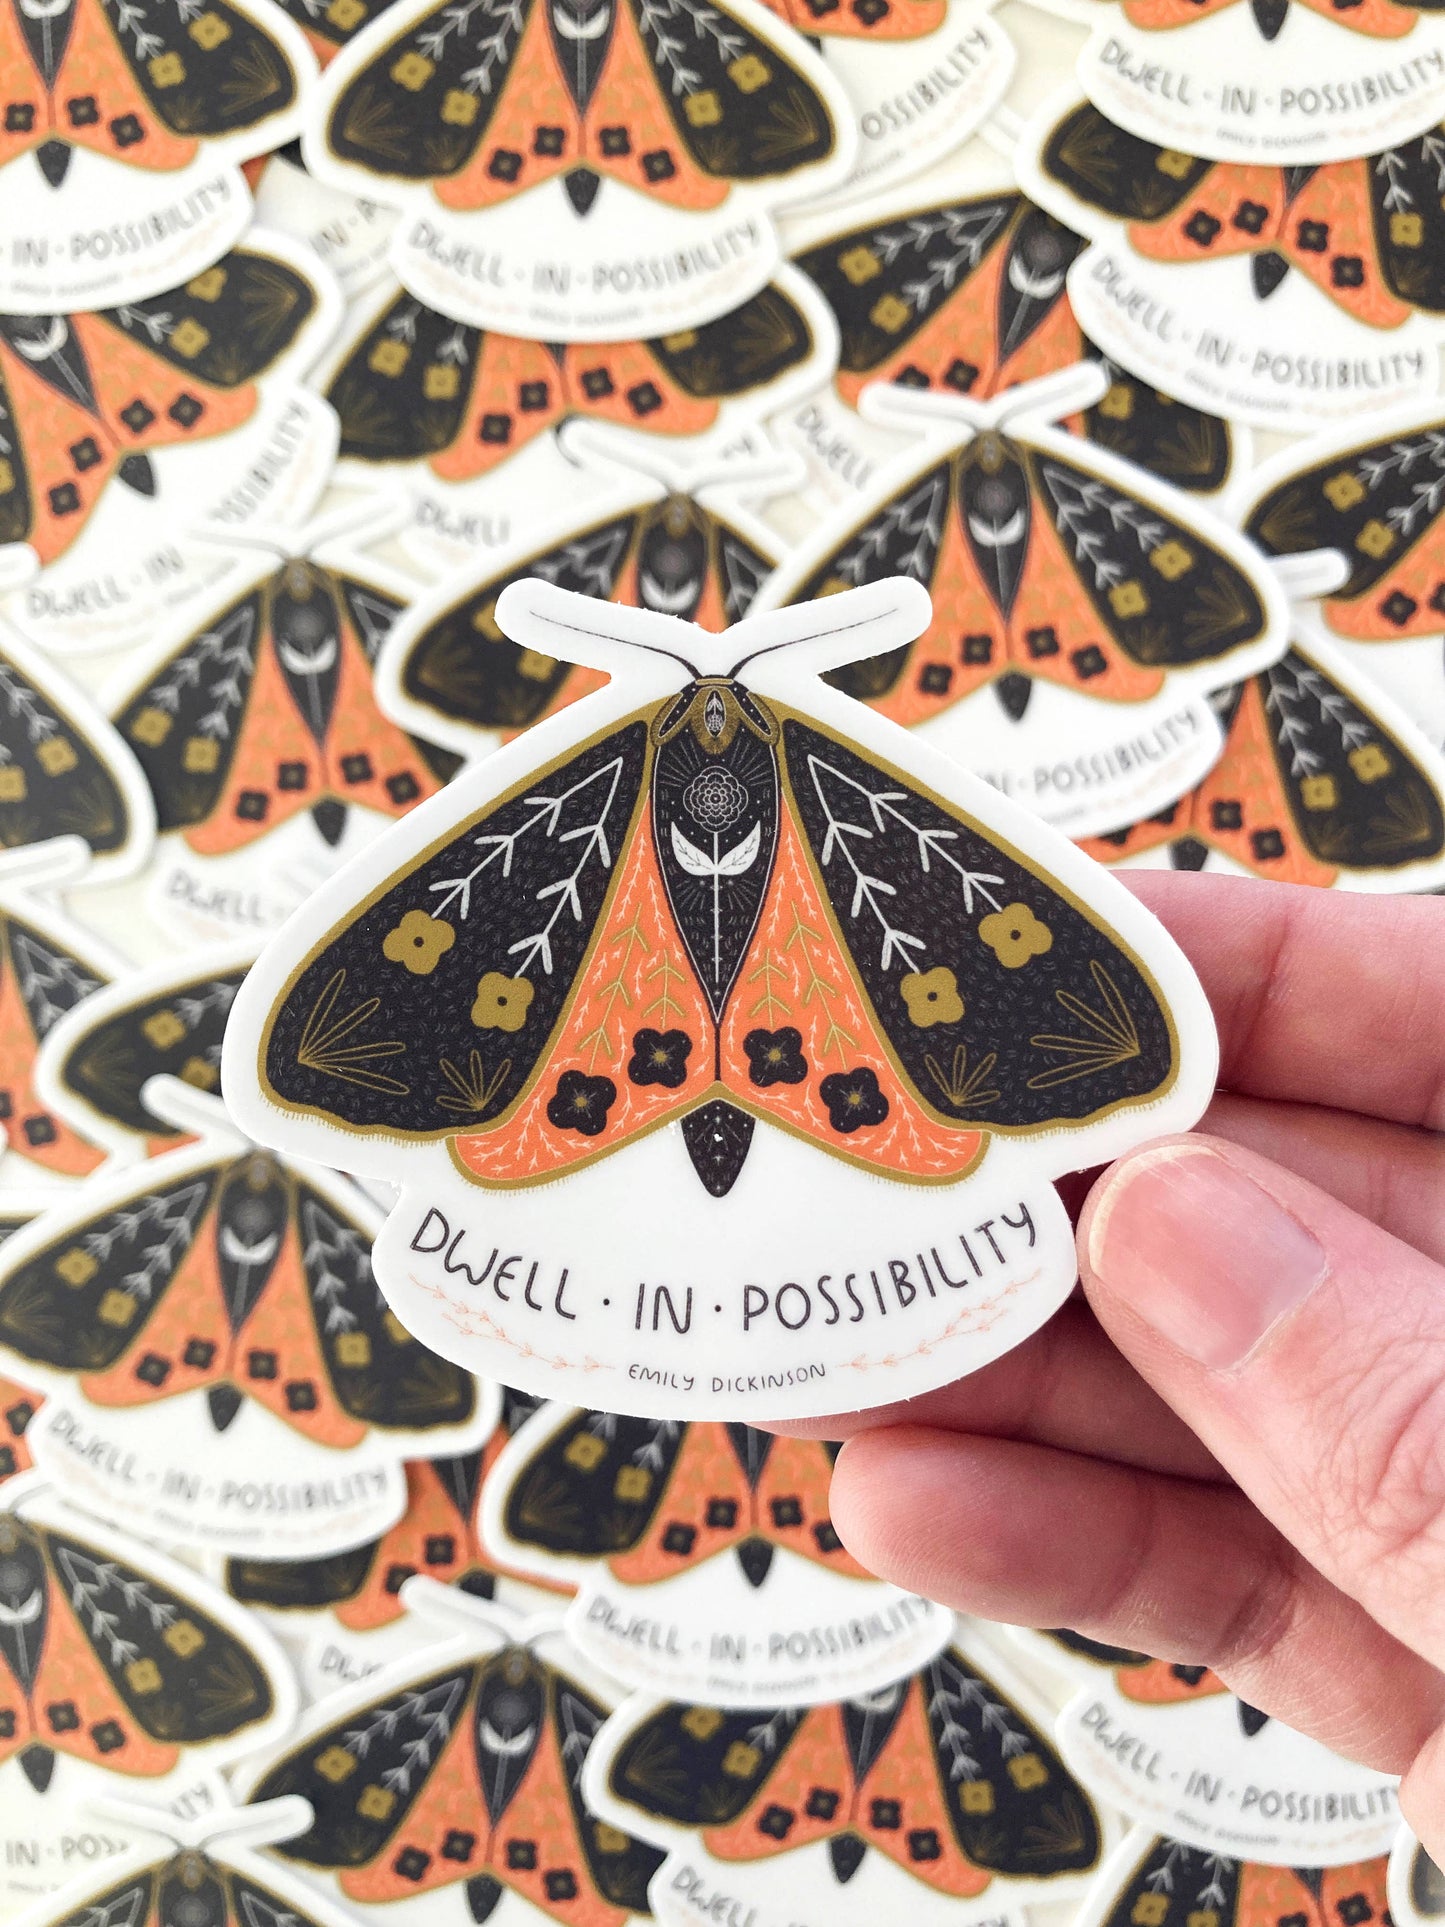 Dwell In Possibility Sticker